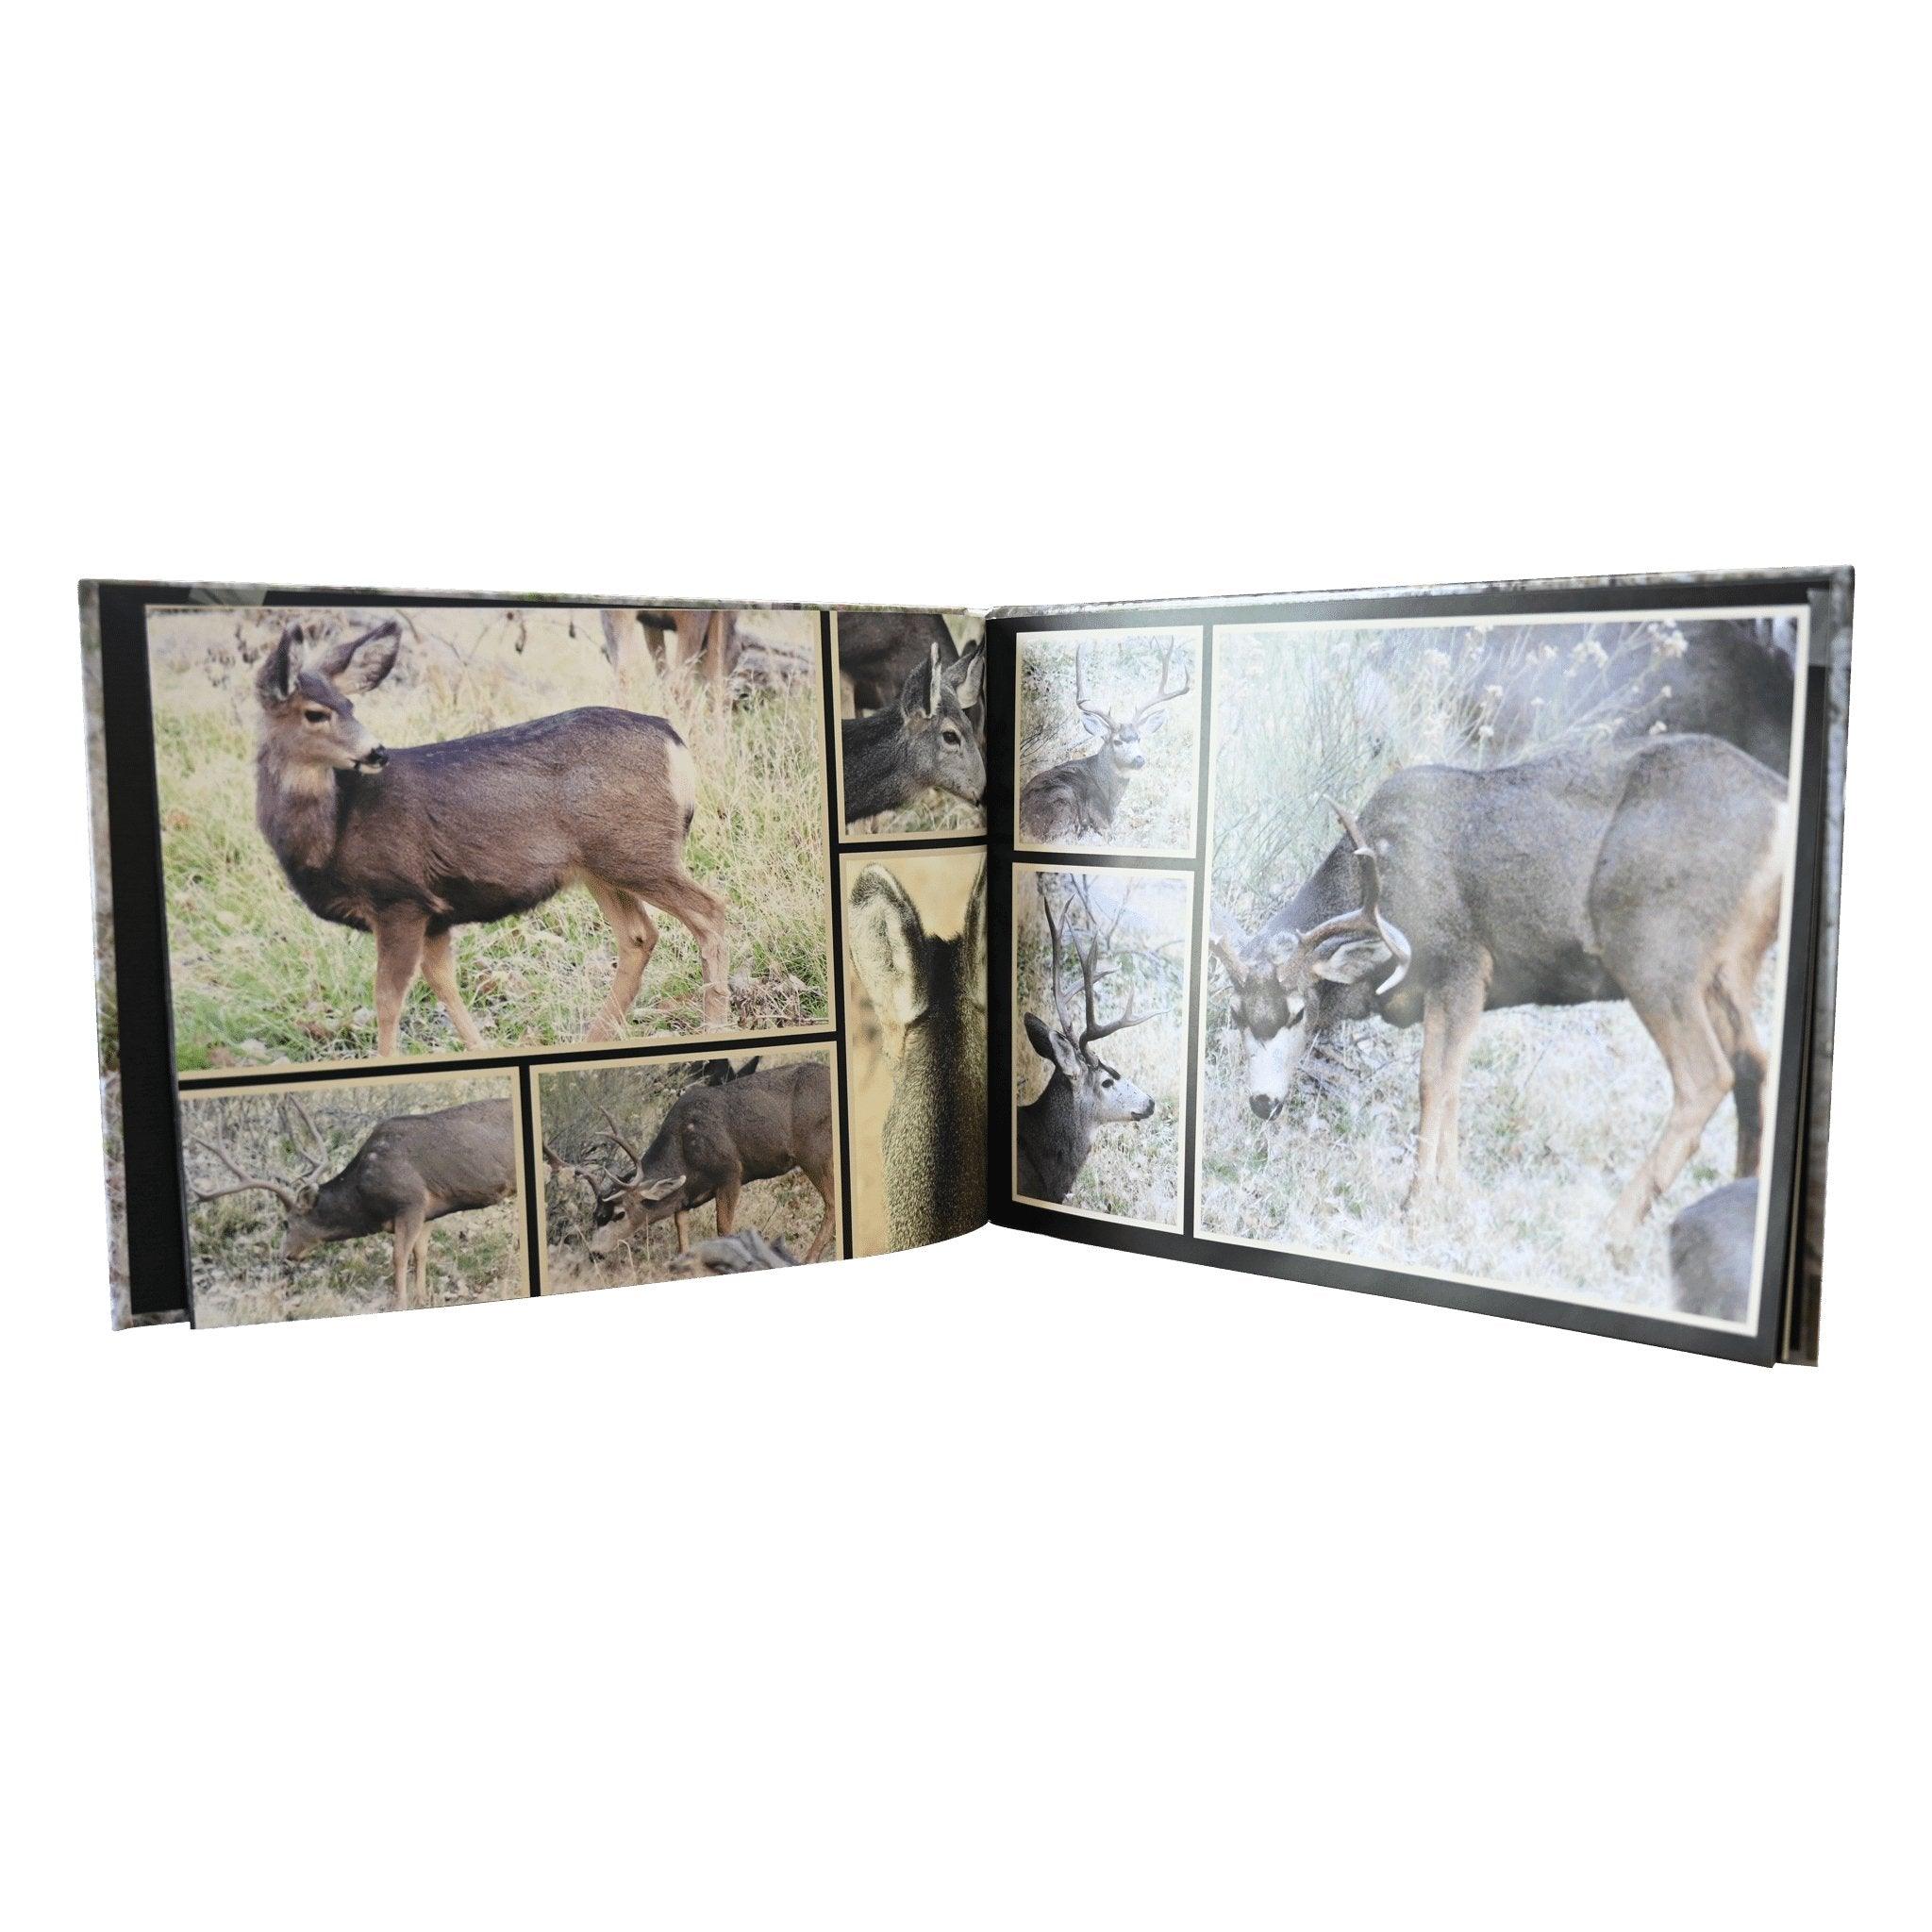 Mule Deer Reference Book by Phil Wilson - Matuska Taxidermy Supply Company